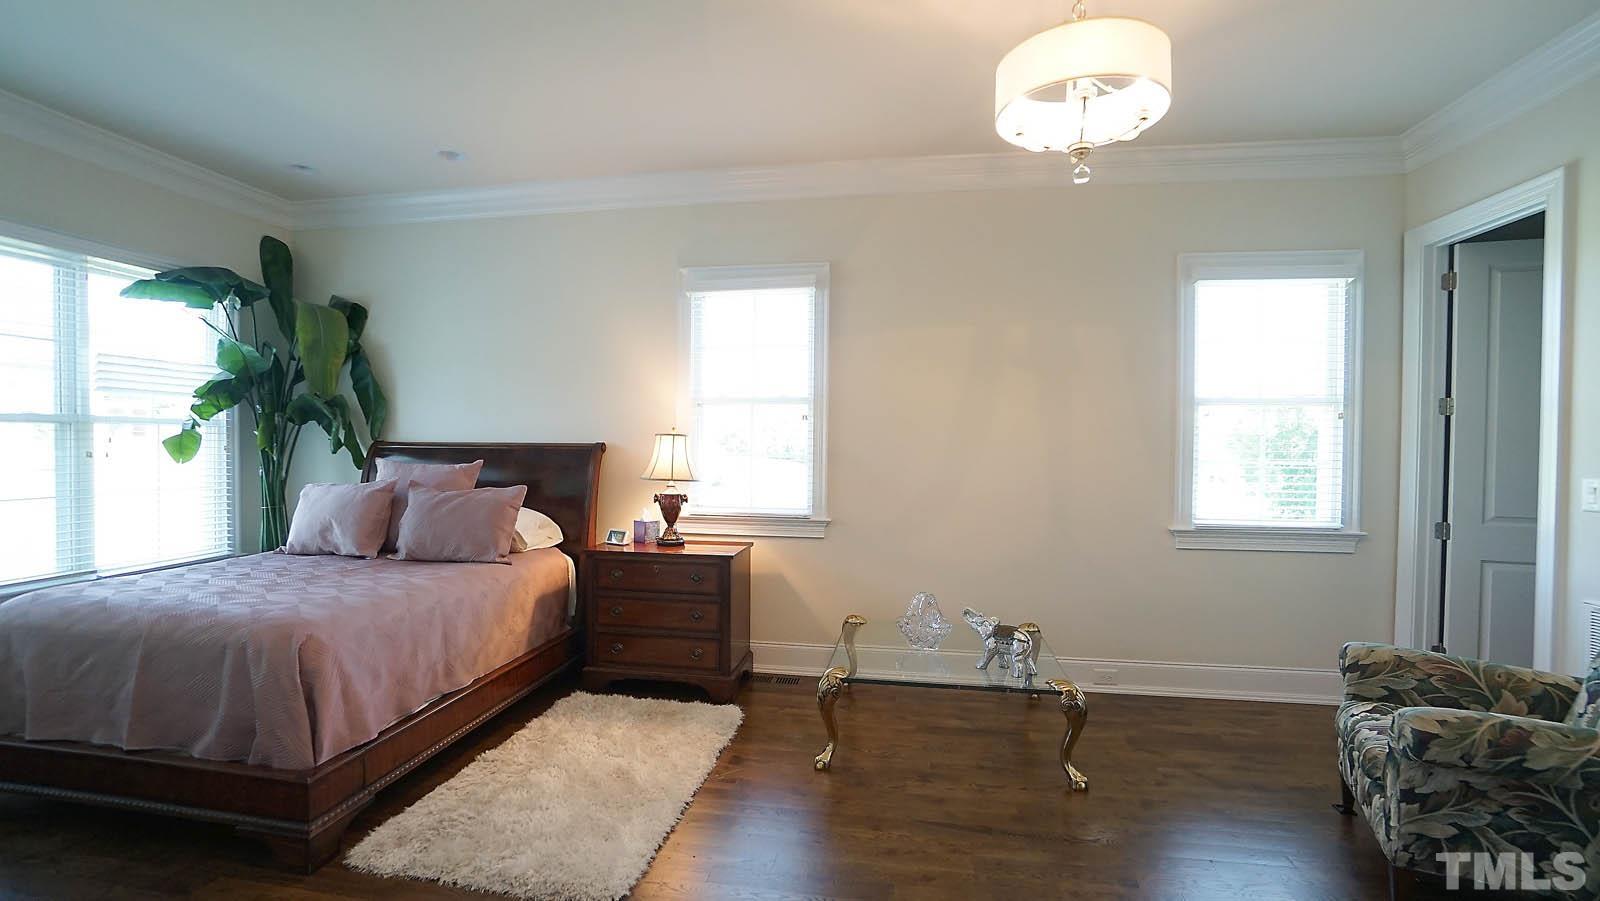 Large 1st floor suite with sitting room, walk-in-closet and own ensuite.